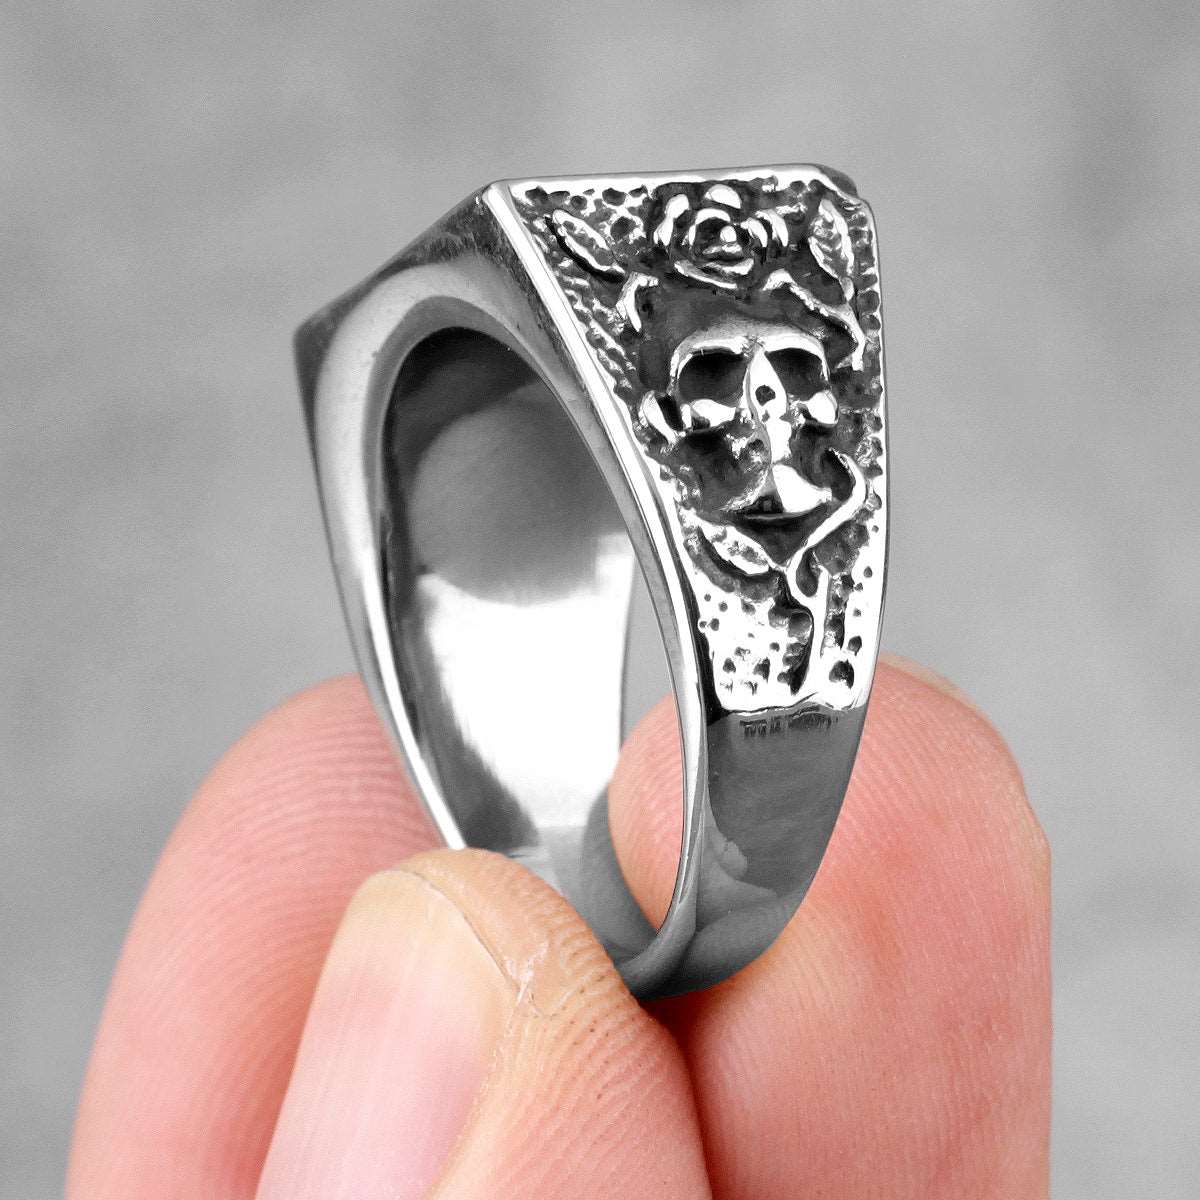 Cowboy dual pistol ring in Stainless steel unisex - Providence silver gold jewelry usa